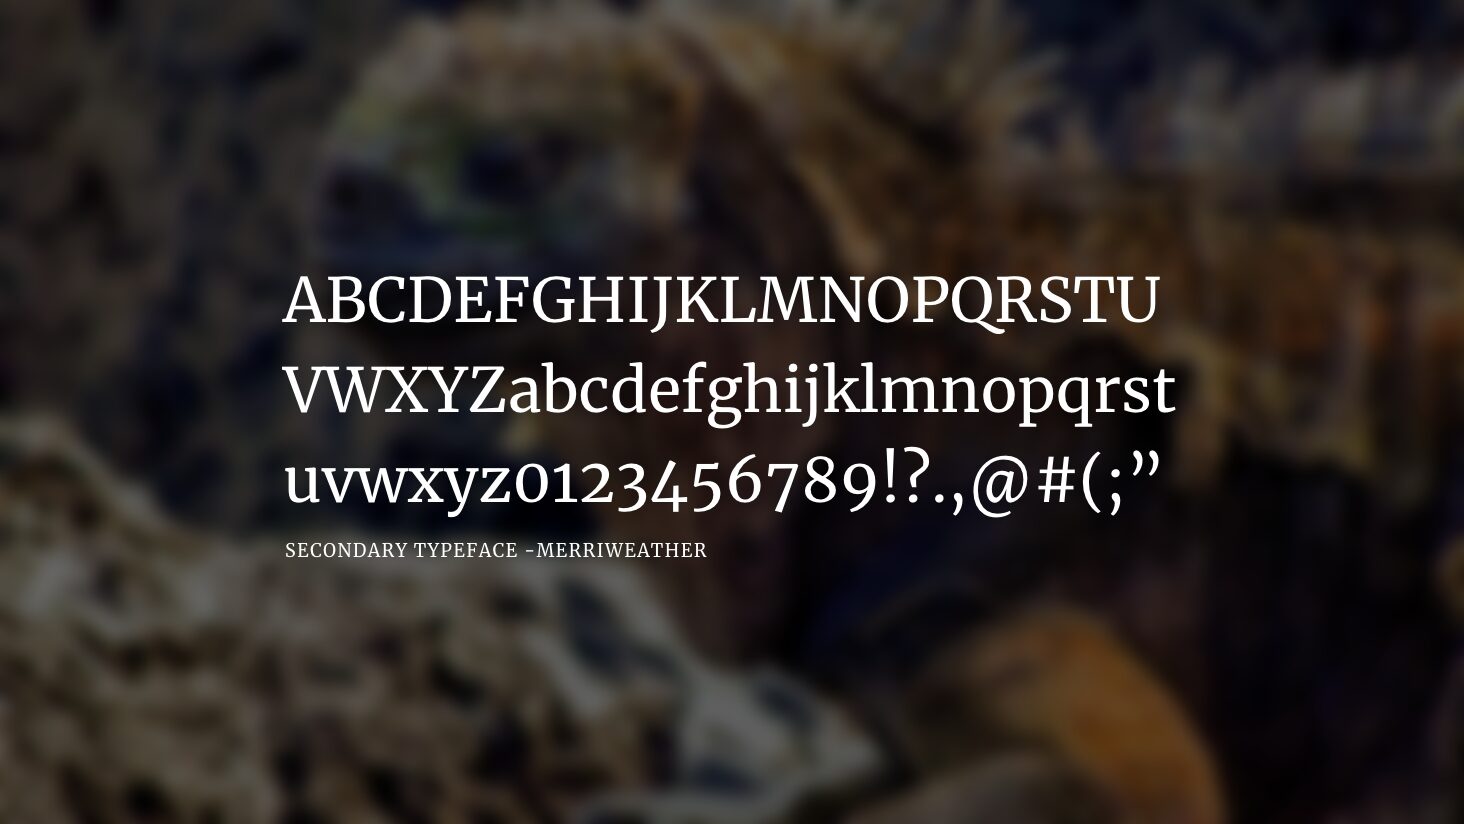 Image for The image is displaying a secondary typeface, Merriweather from the Galapagos Conservation Trust website